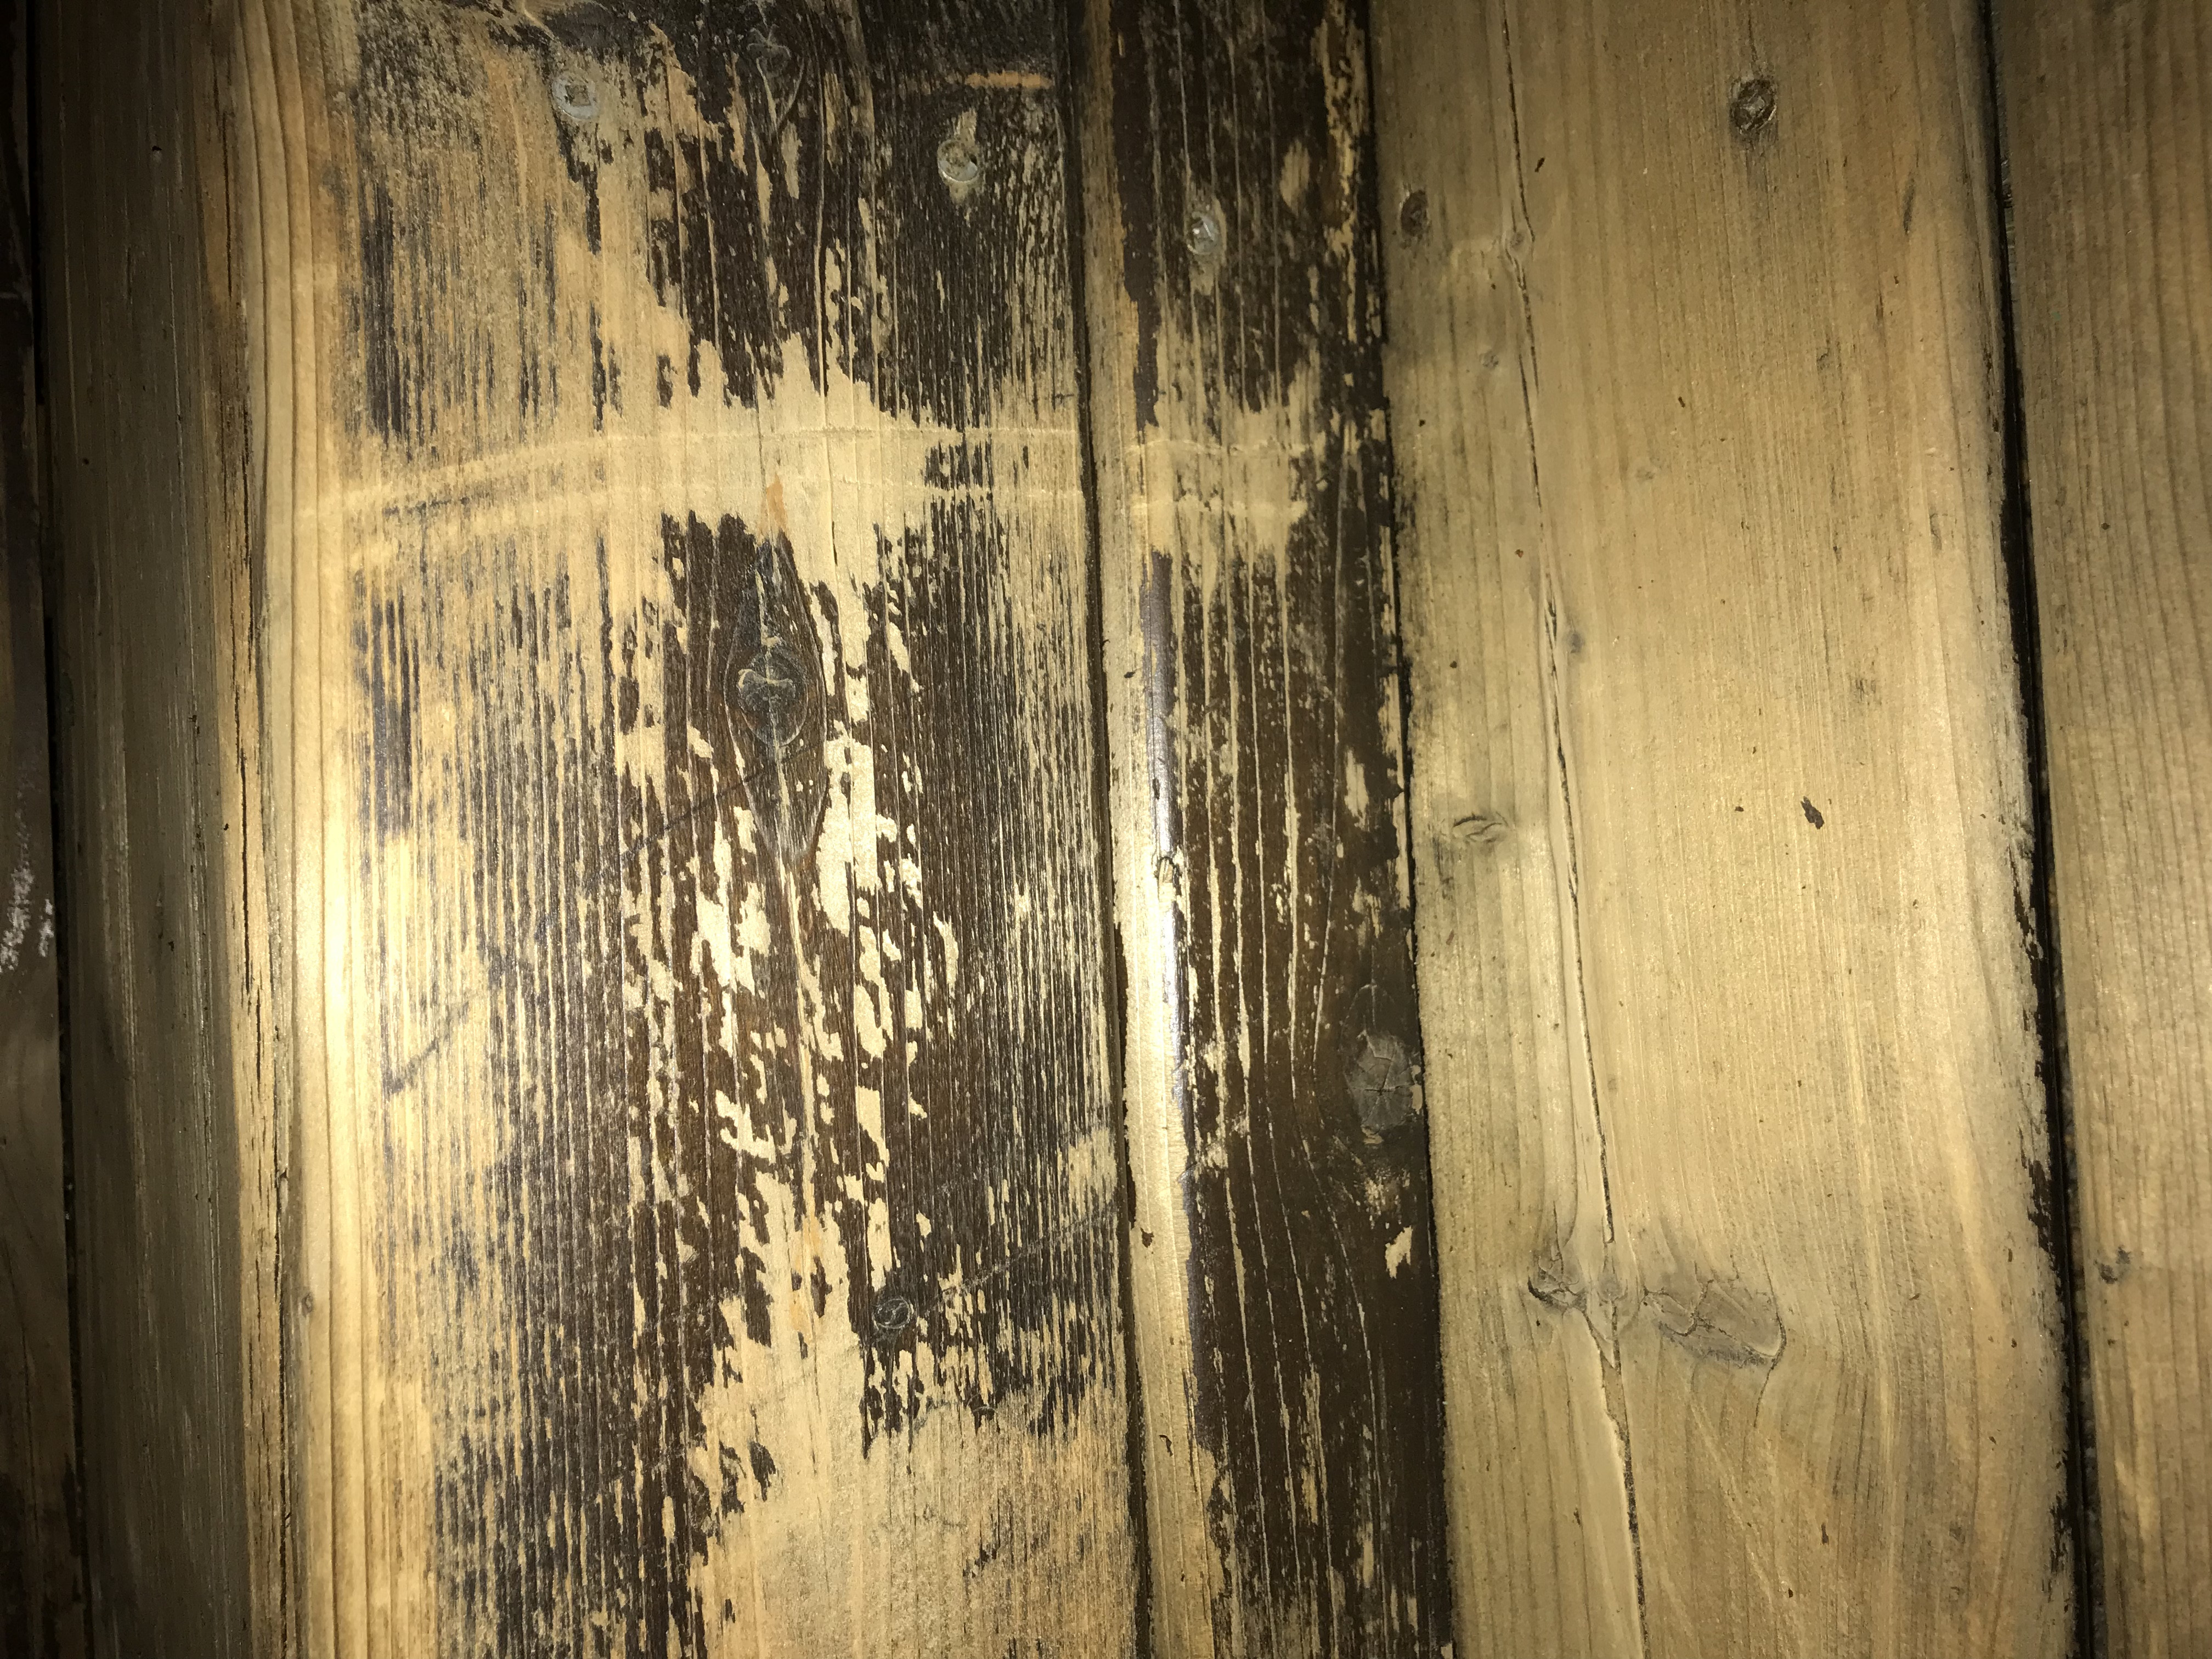 12 Unique Cost to Sand and Refinish Hardwood Floors Uk 2024 free download cost to sand and refinish hardwood floors uk of deck stripping removing an old deck stain best deck stain with 22b4c93e 057f 4f9d b8f8 491a4bb825b2